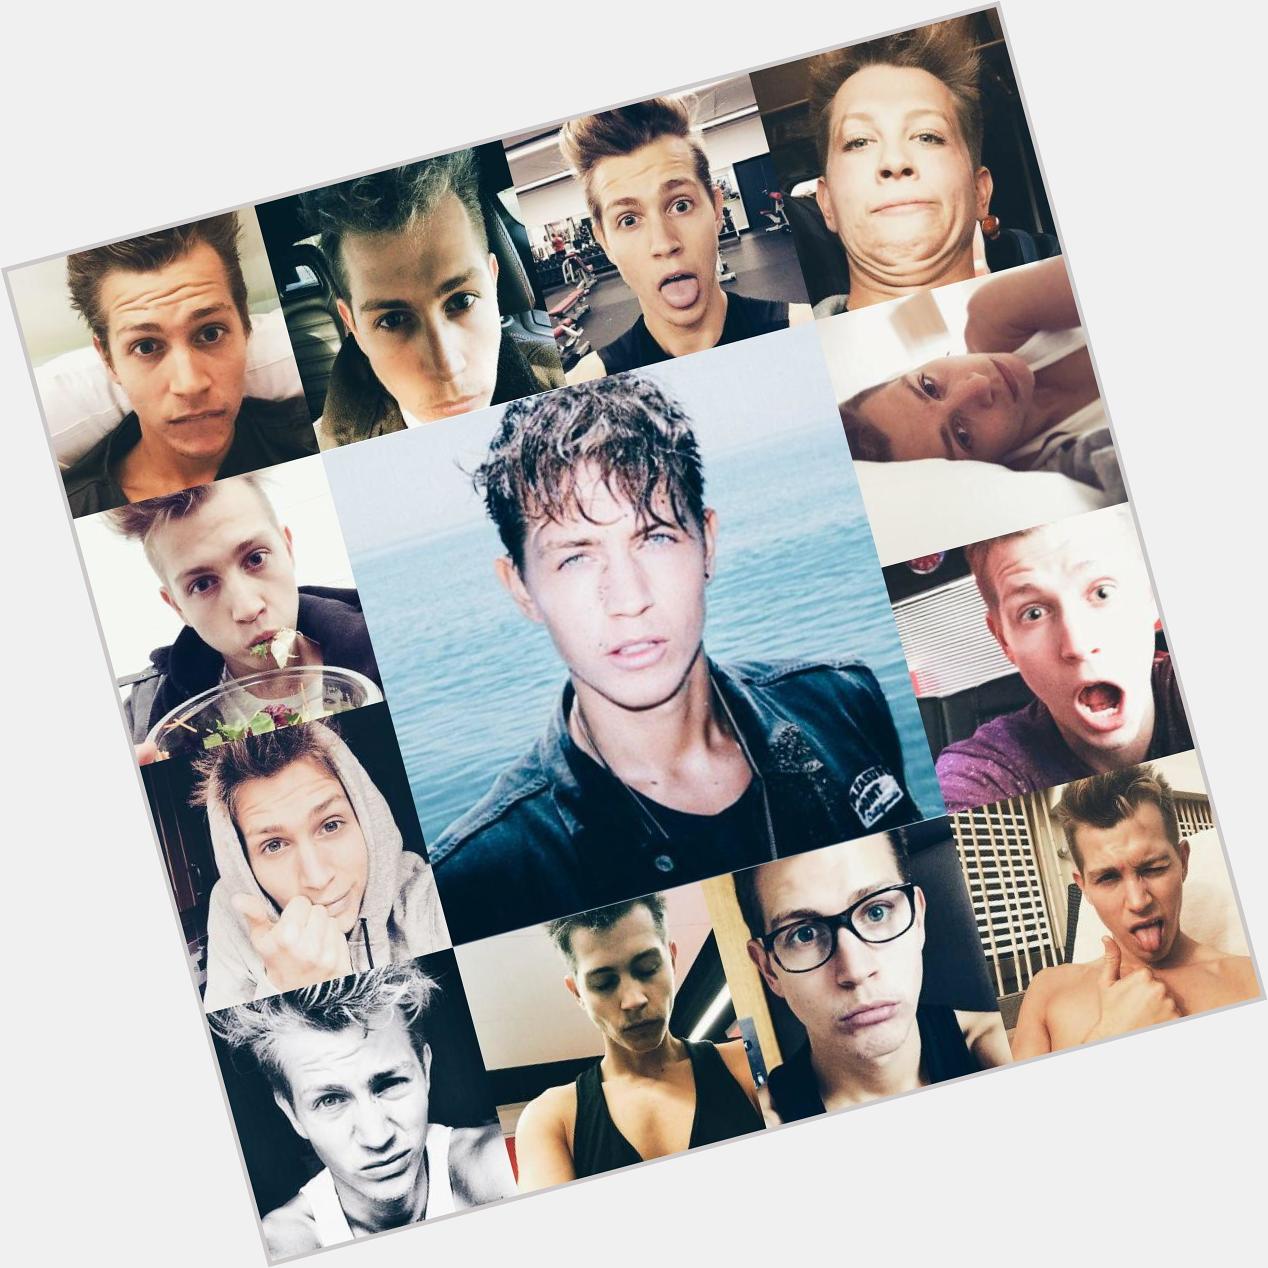 Happy bday to the awesome james mcvey! 